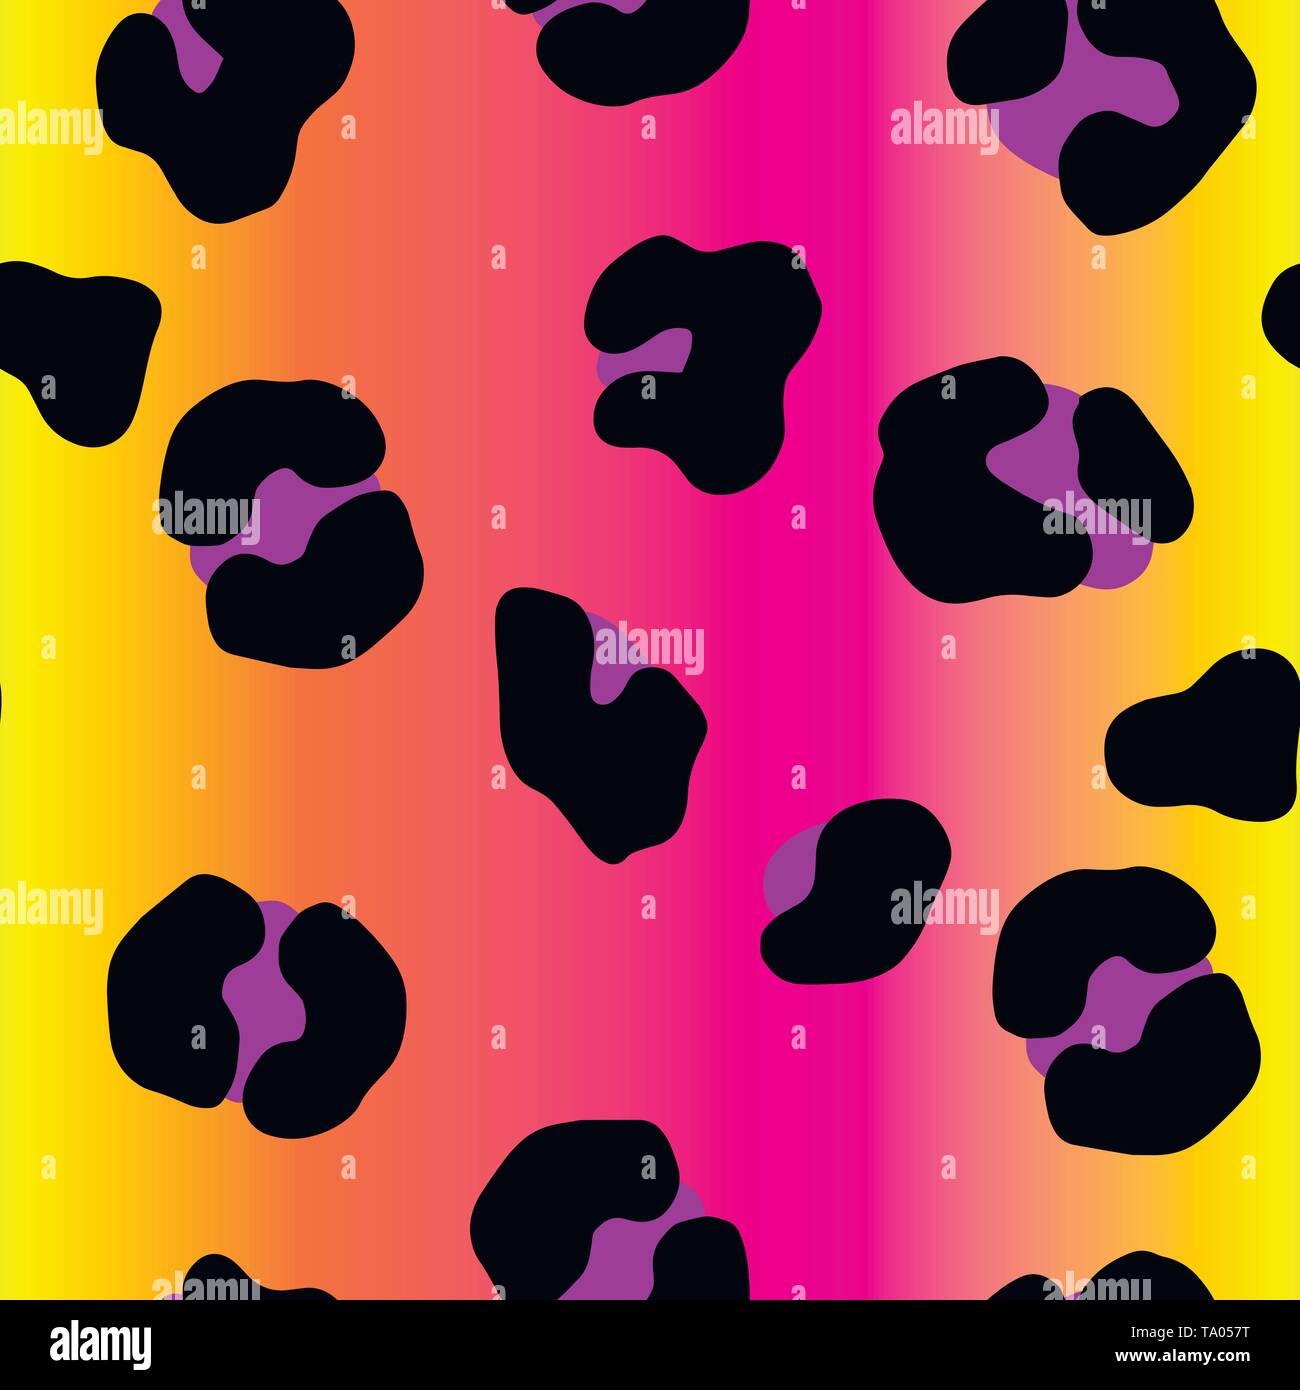 Vector neon gradient animal print. Seamless leopard pattern design for fabric and textile, packaging, web and social media design. Stock Vector